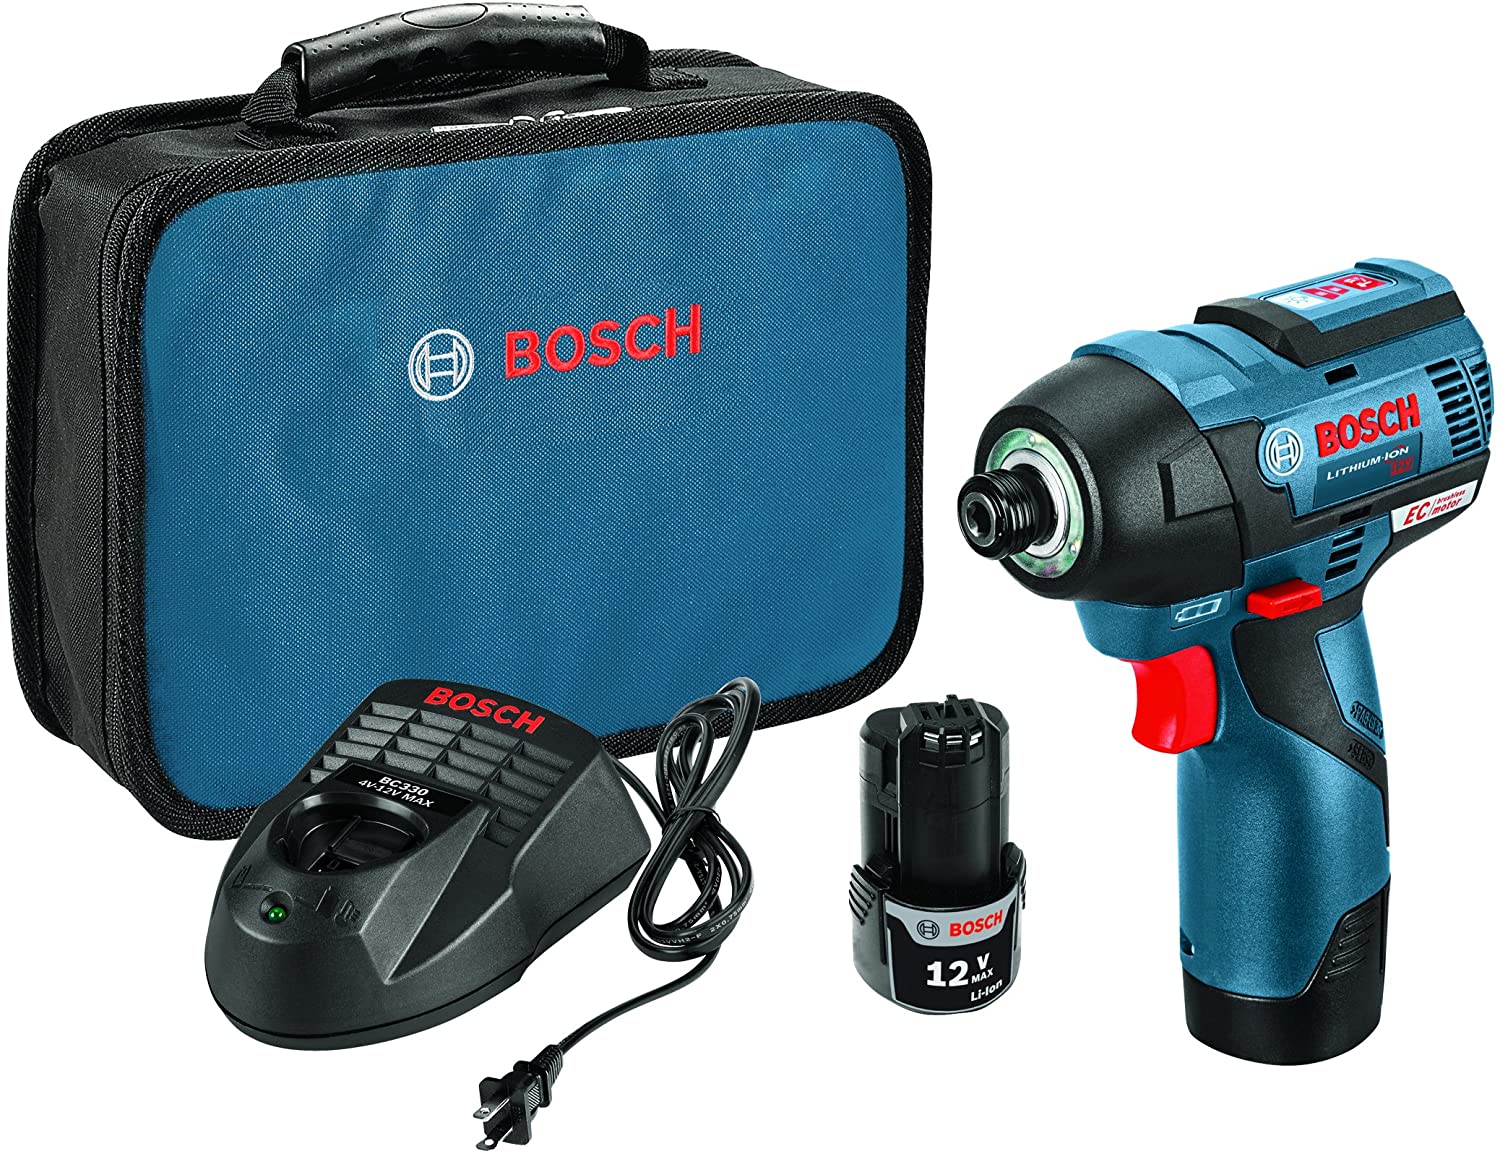 BOSCH PS42 02 Impact Driver pros and cons - Best Impact Driver in 2023 - The Definitive Guide: How to Cut Your Project Time in Half? - HandyMan.Guide - Impact Driver